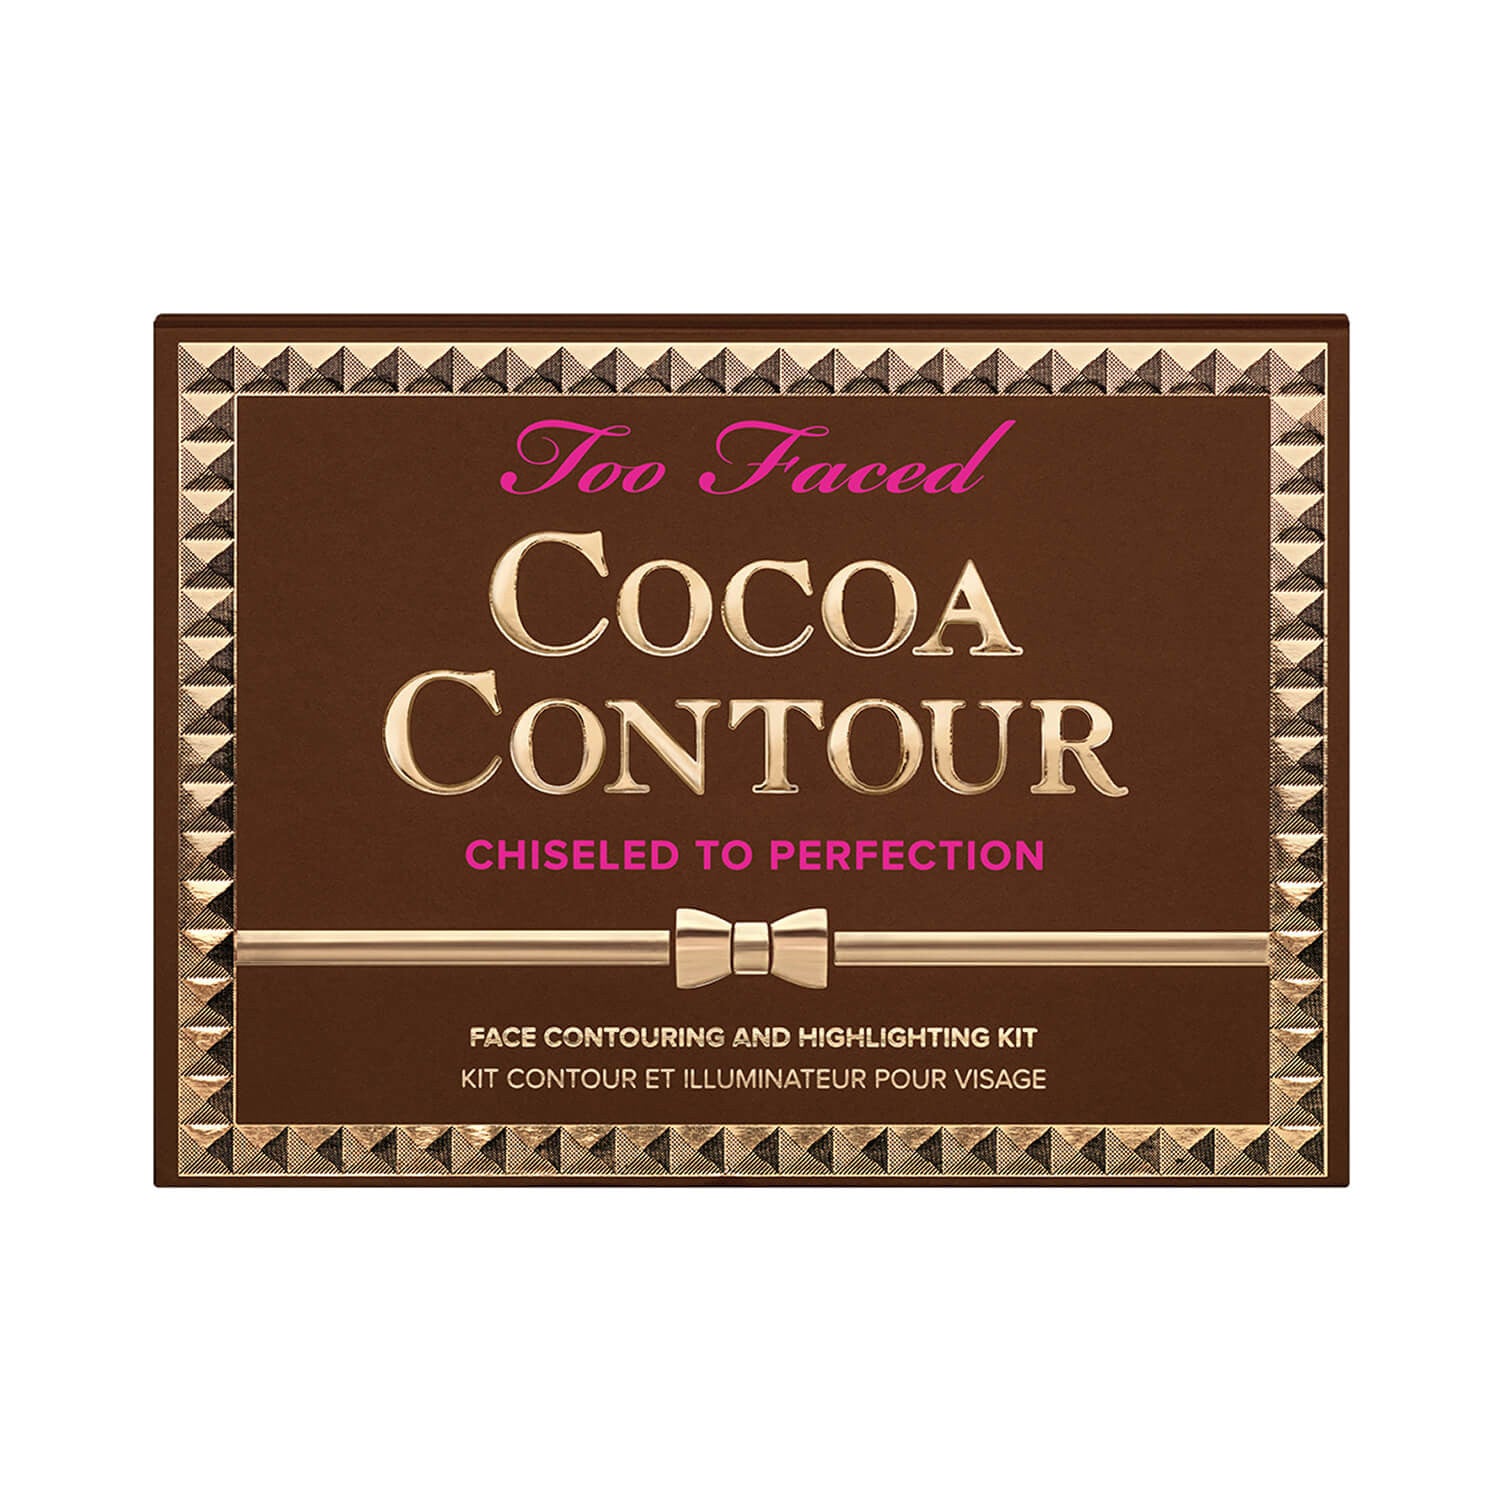 Too Faced Cocoa Contour Chiseled to Perfection Deep Closed